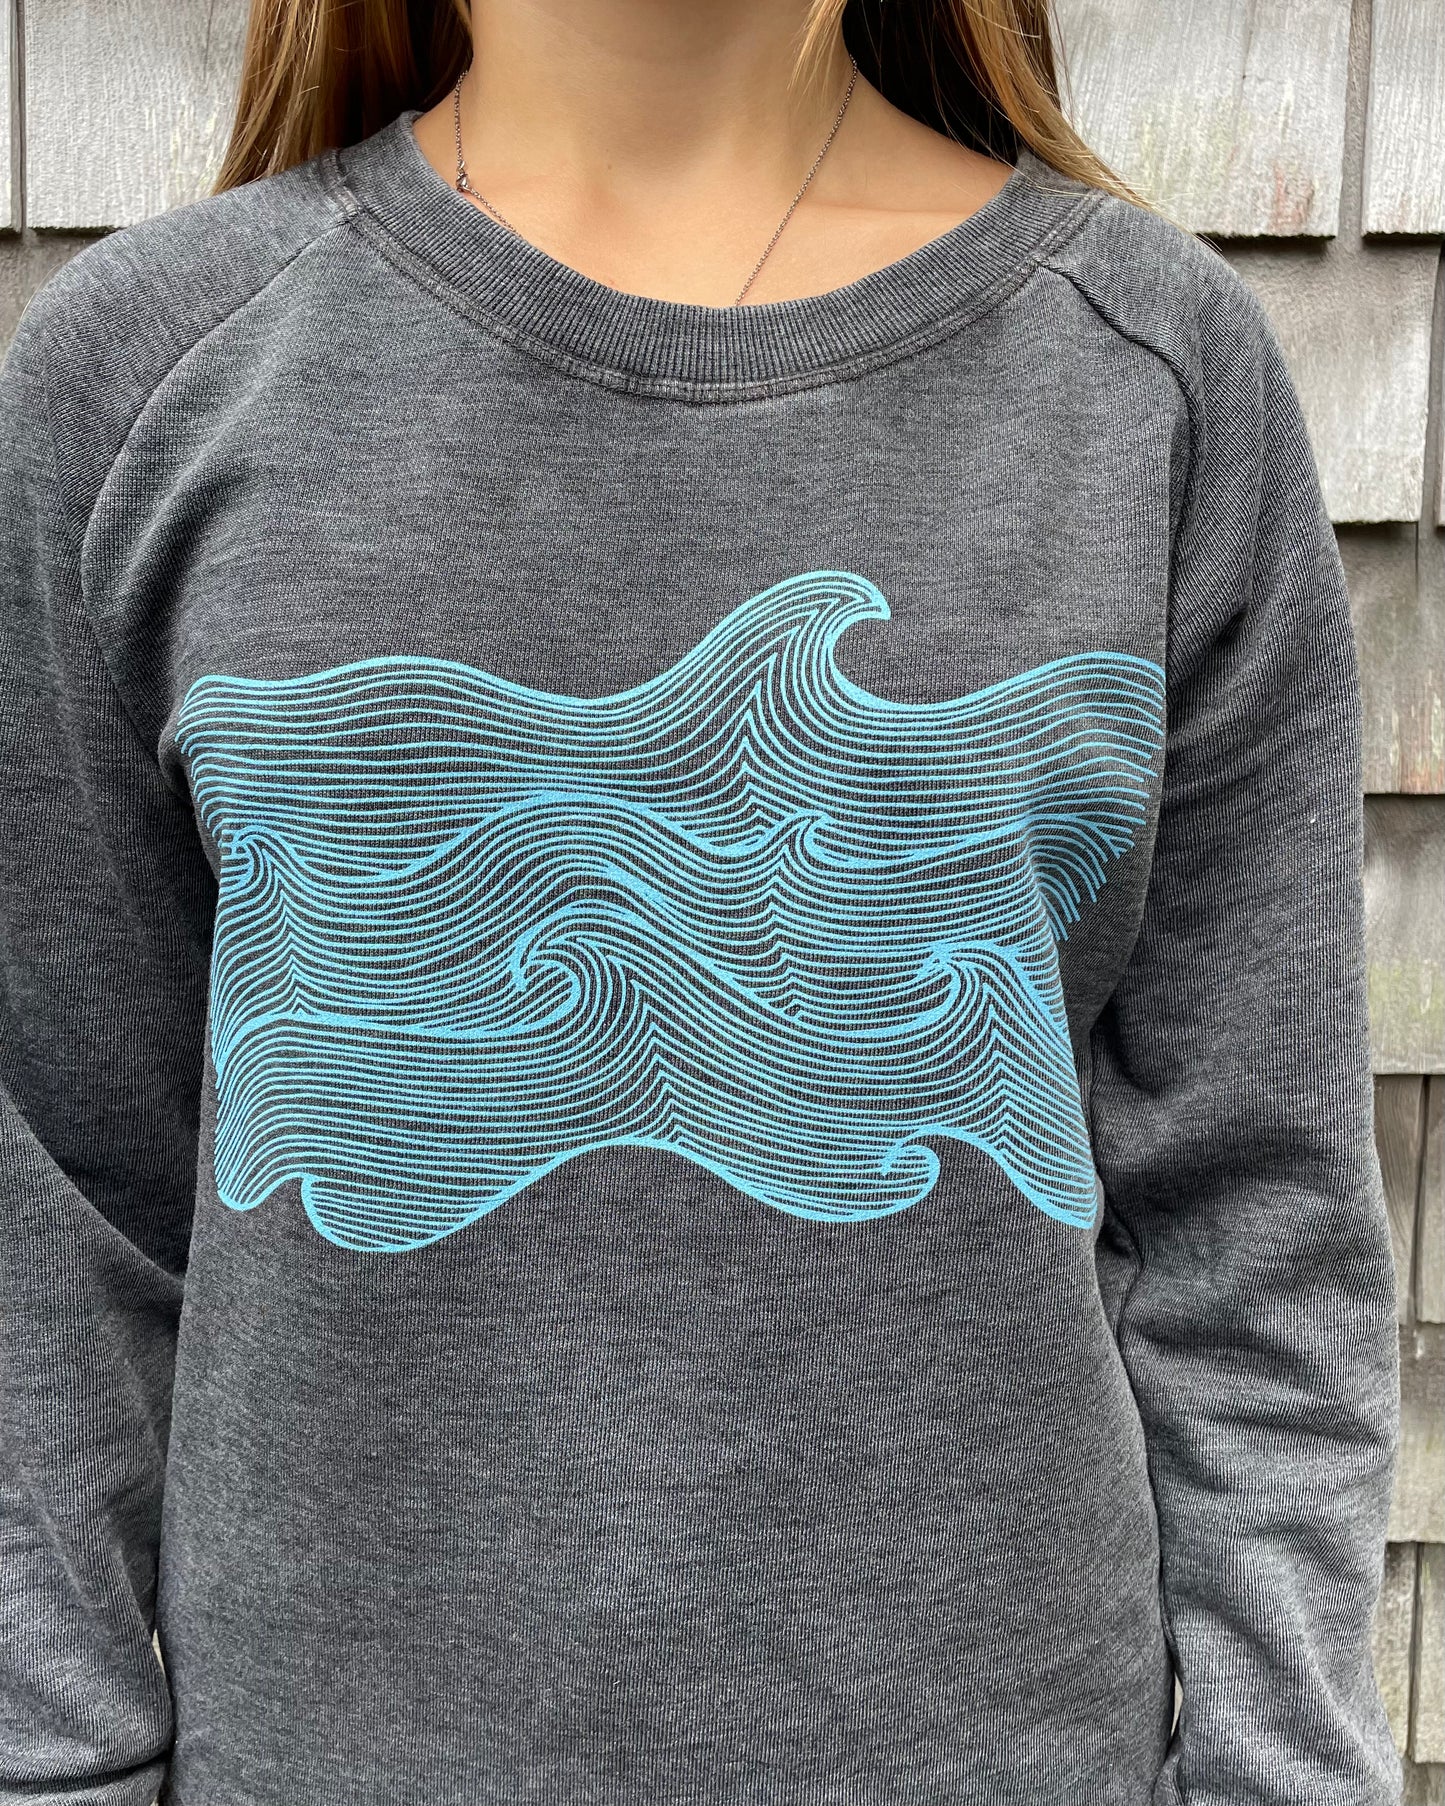 Life Comes in Waves Double Print Crew